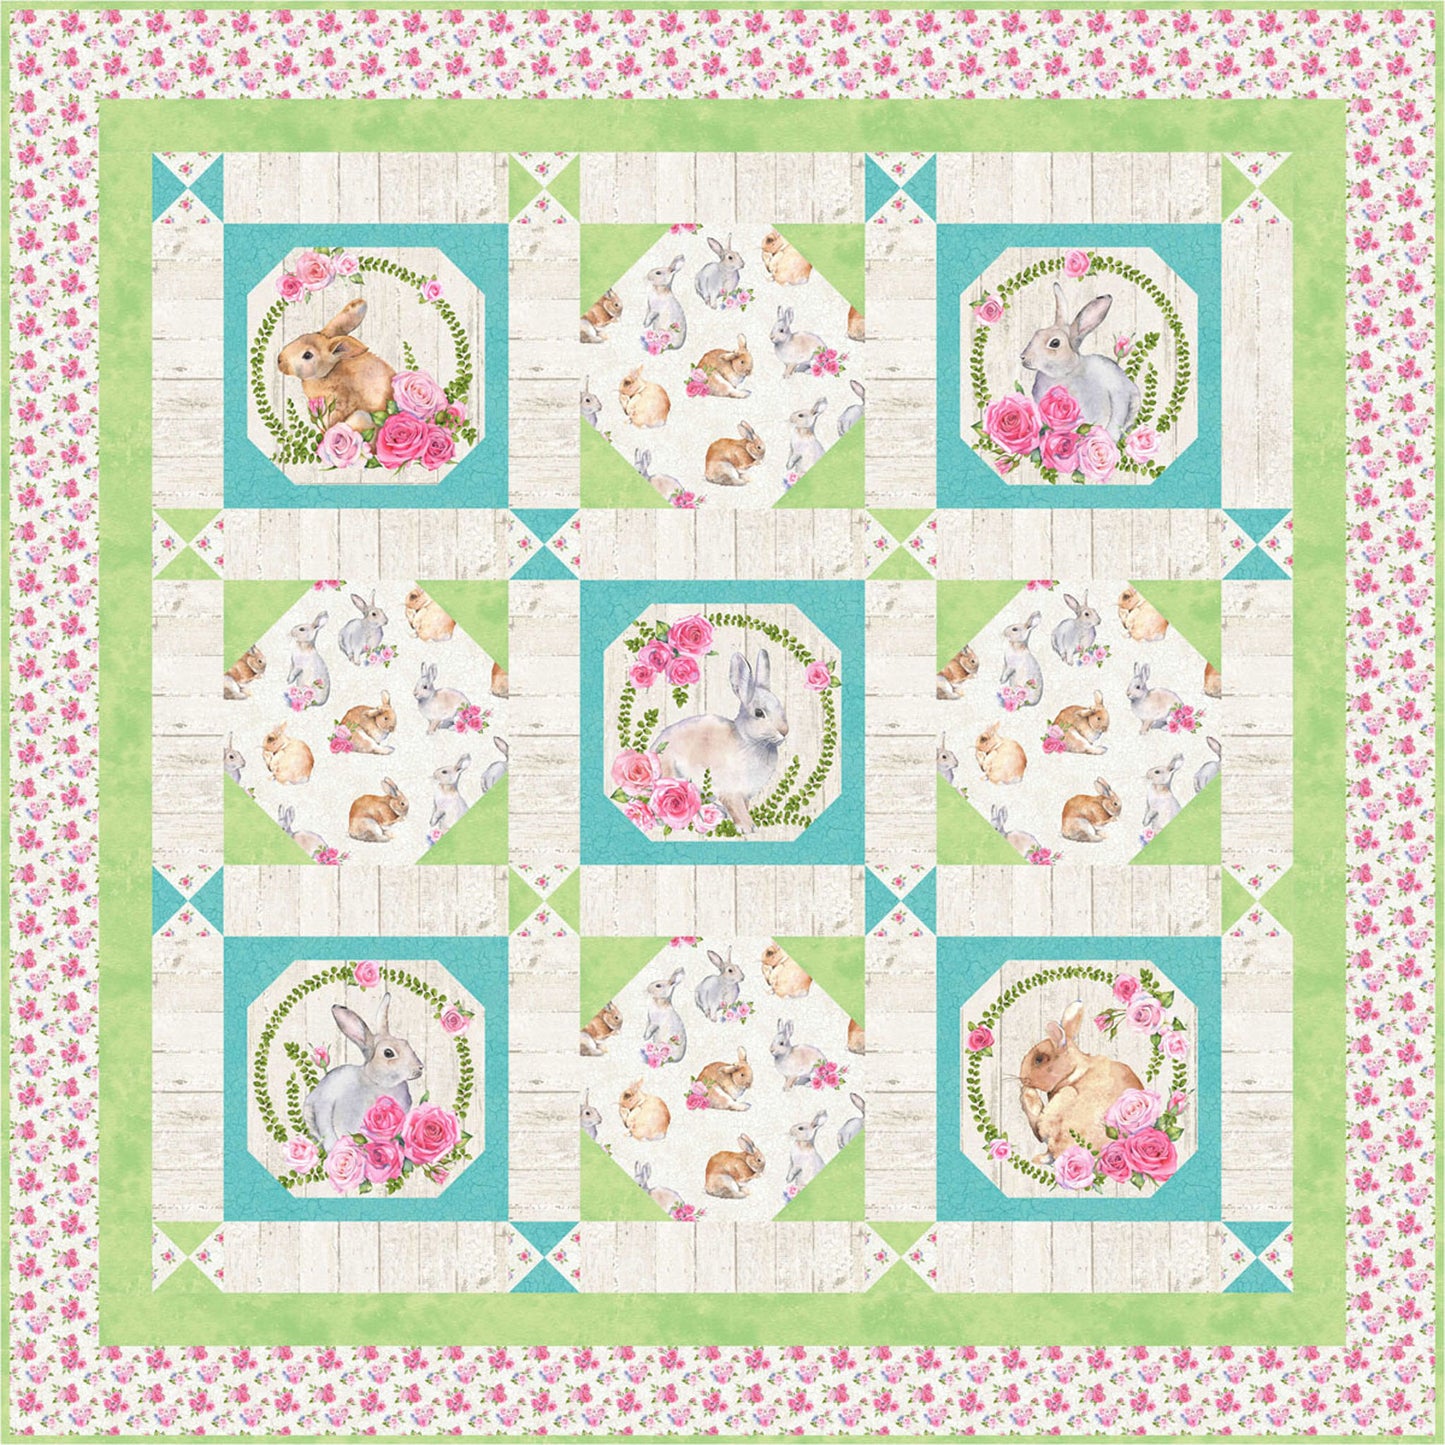 Colorful quilt featuring a cute bunny surrounded by vibrant flowers with frames in green and turquoise.